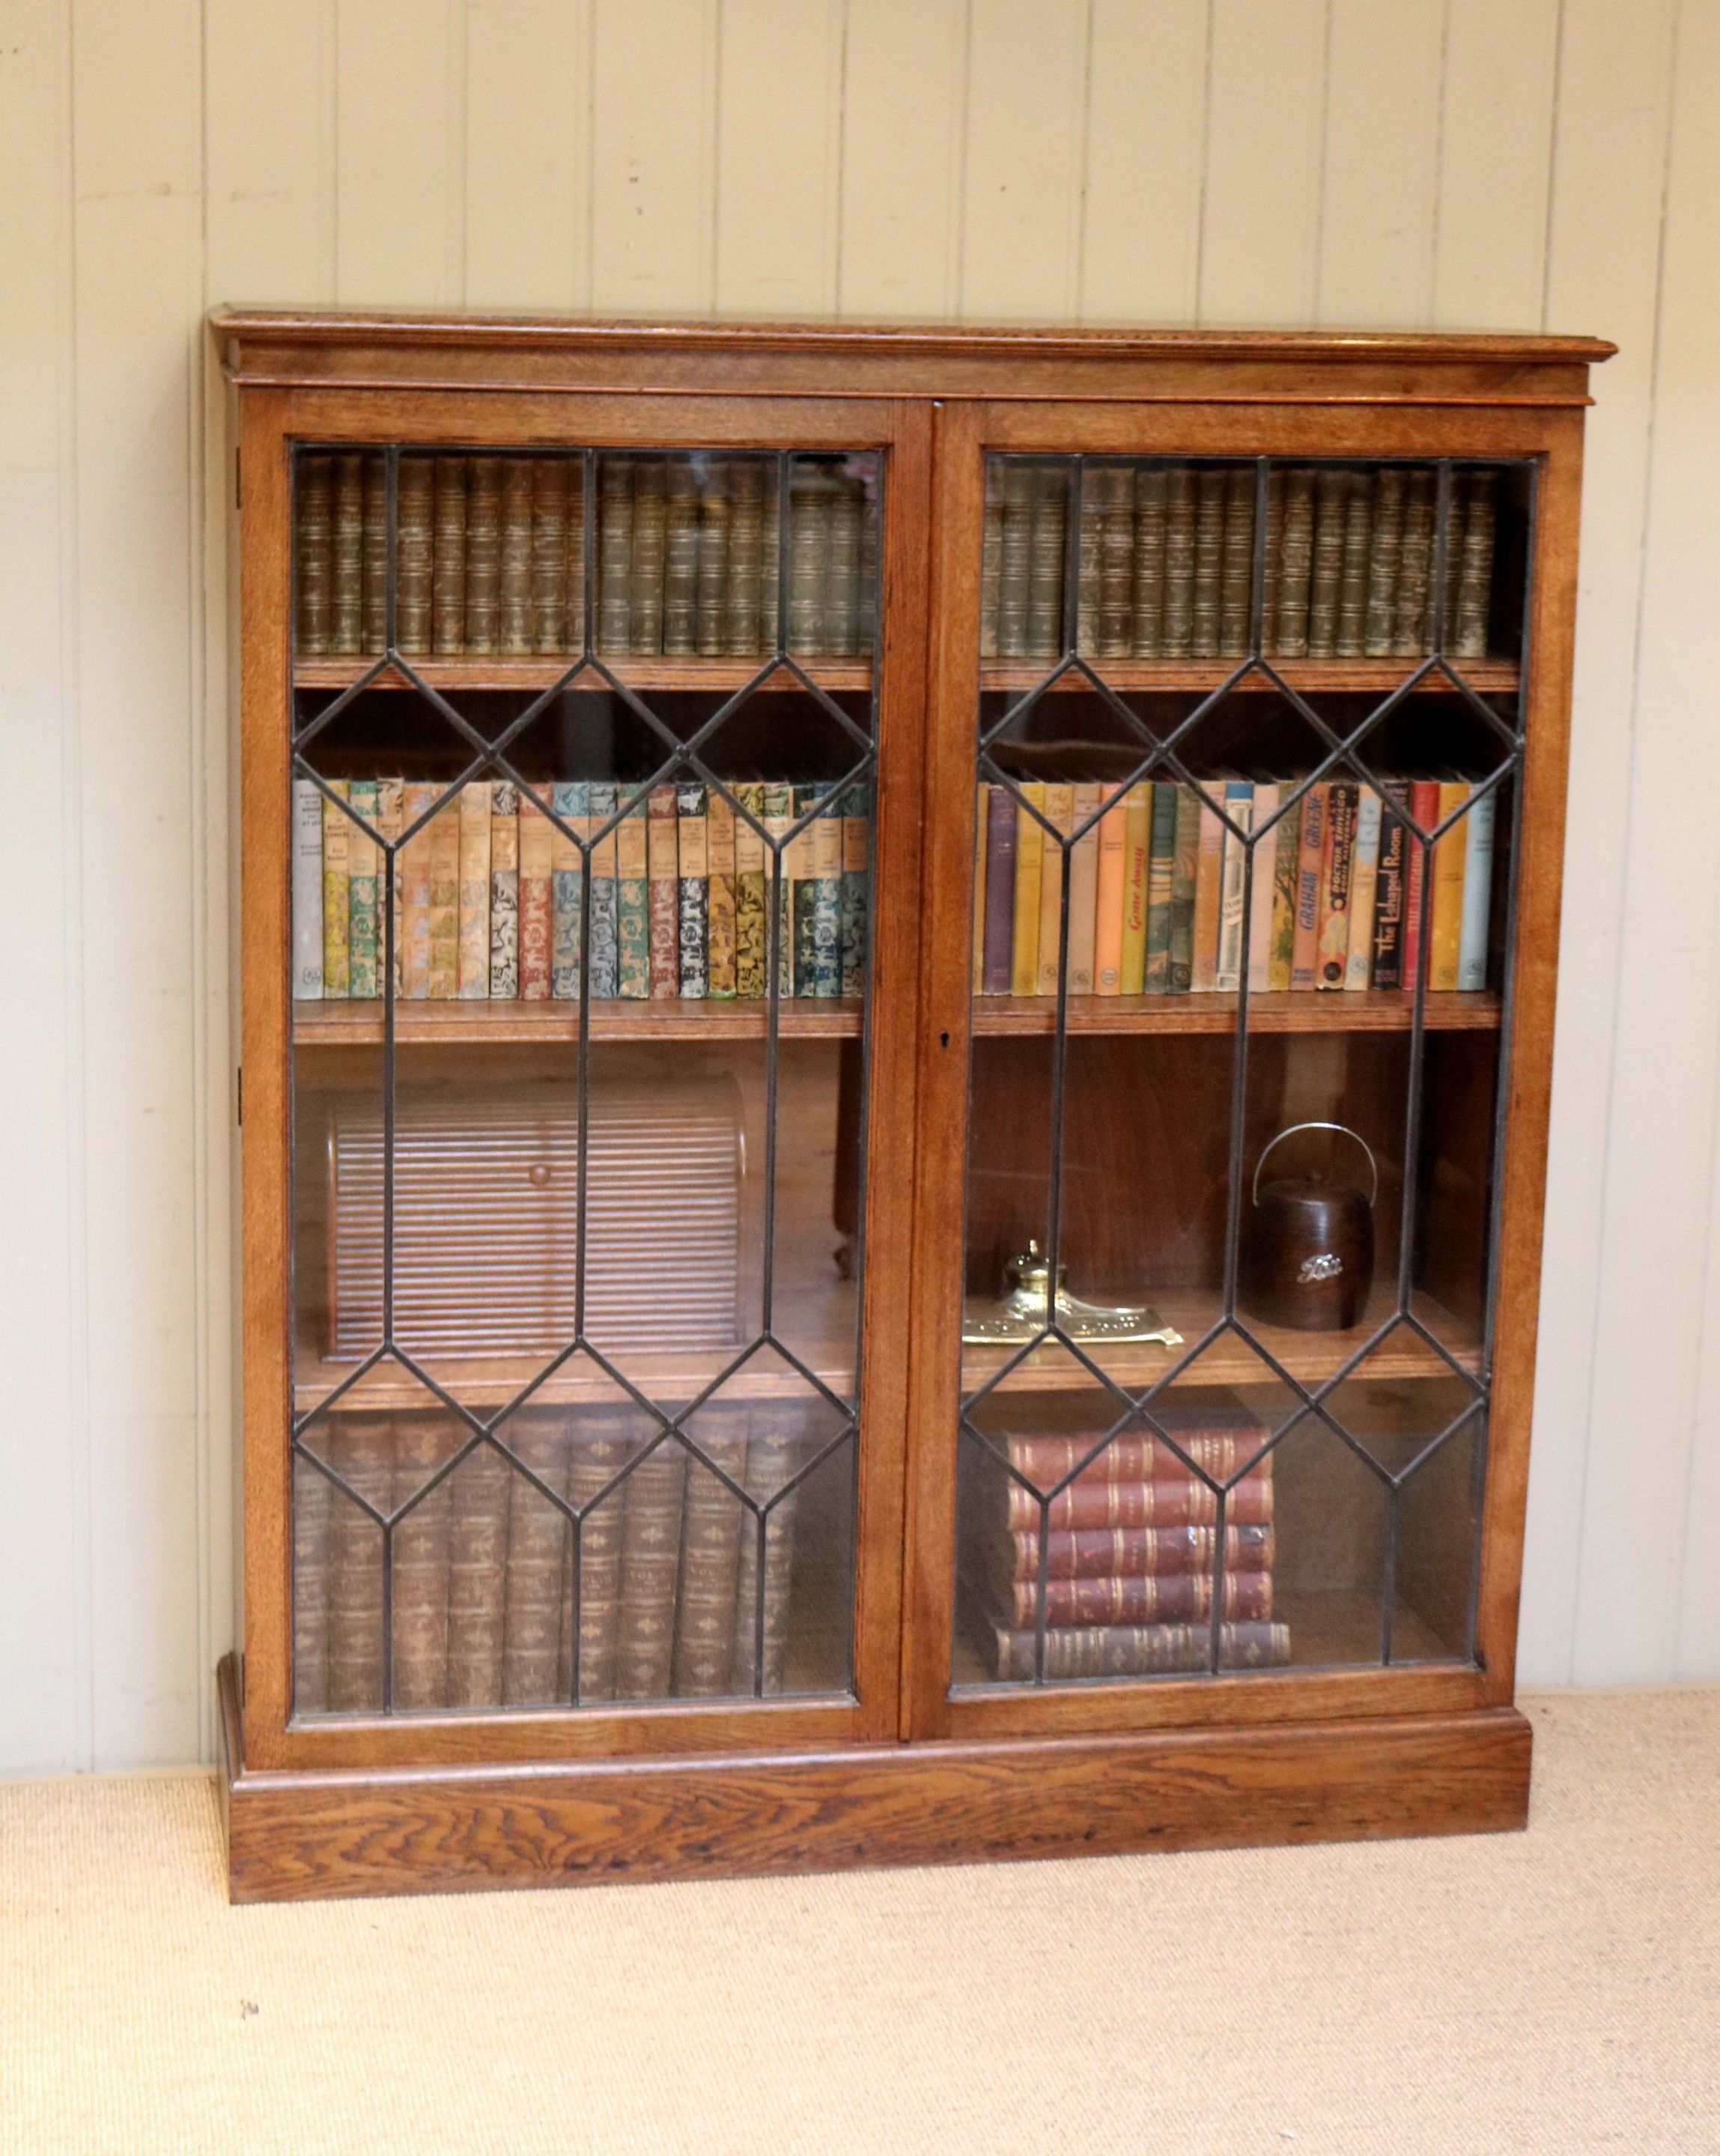 Substantial Solid Oak Glazed Bookcase C 1920 English From Regarding Oak Glazed Bookcase (View 7 of 15)